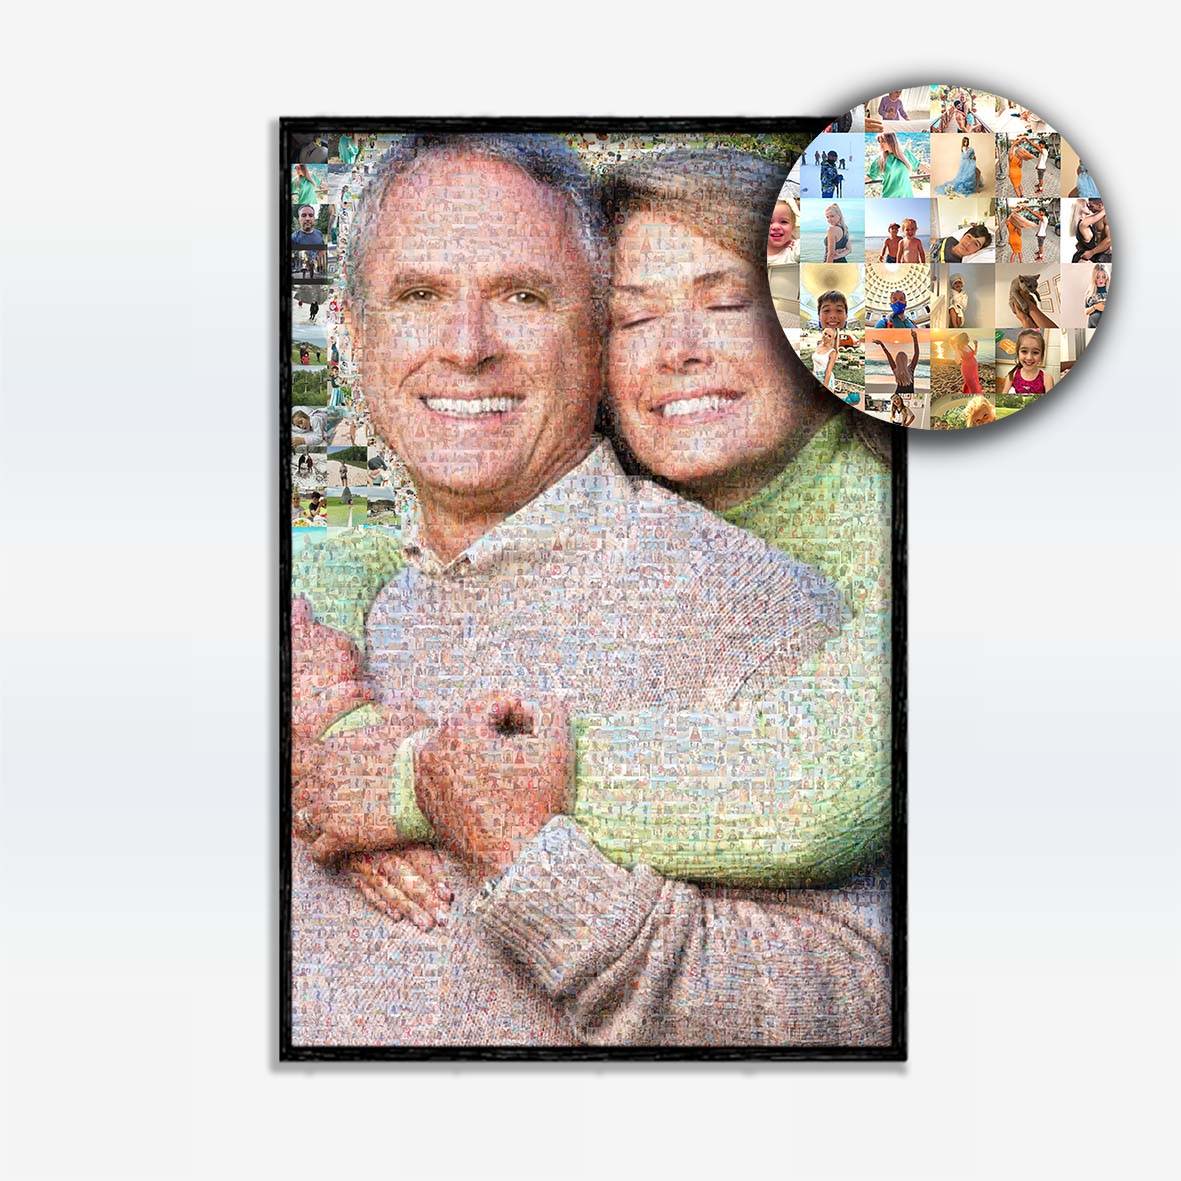 the Memory Vault - a Personalized Gift